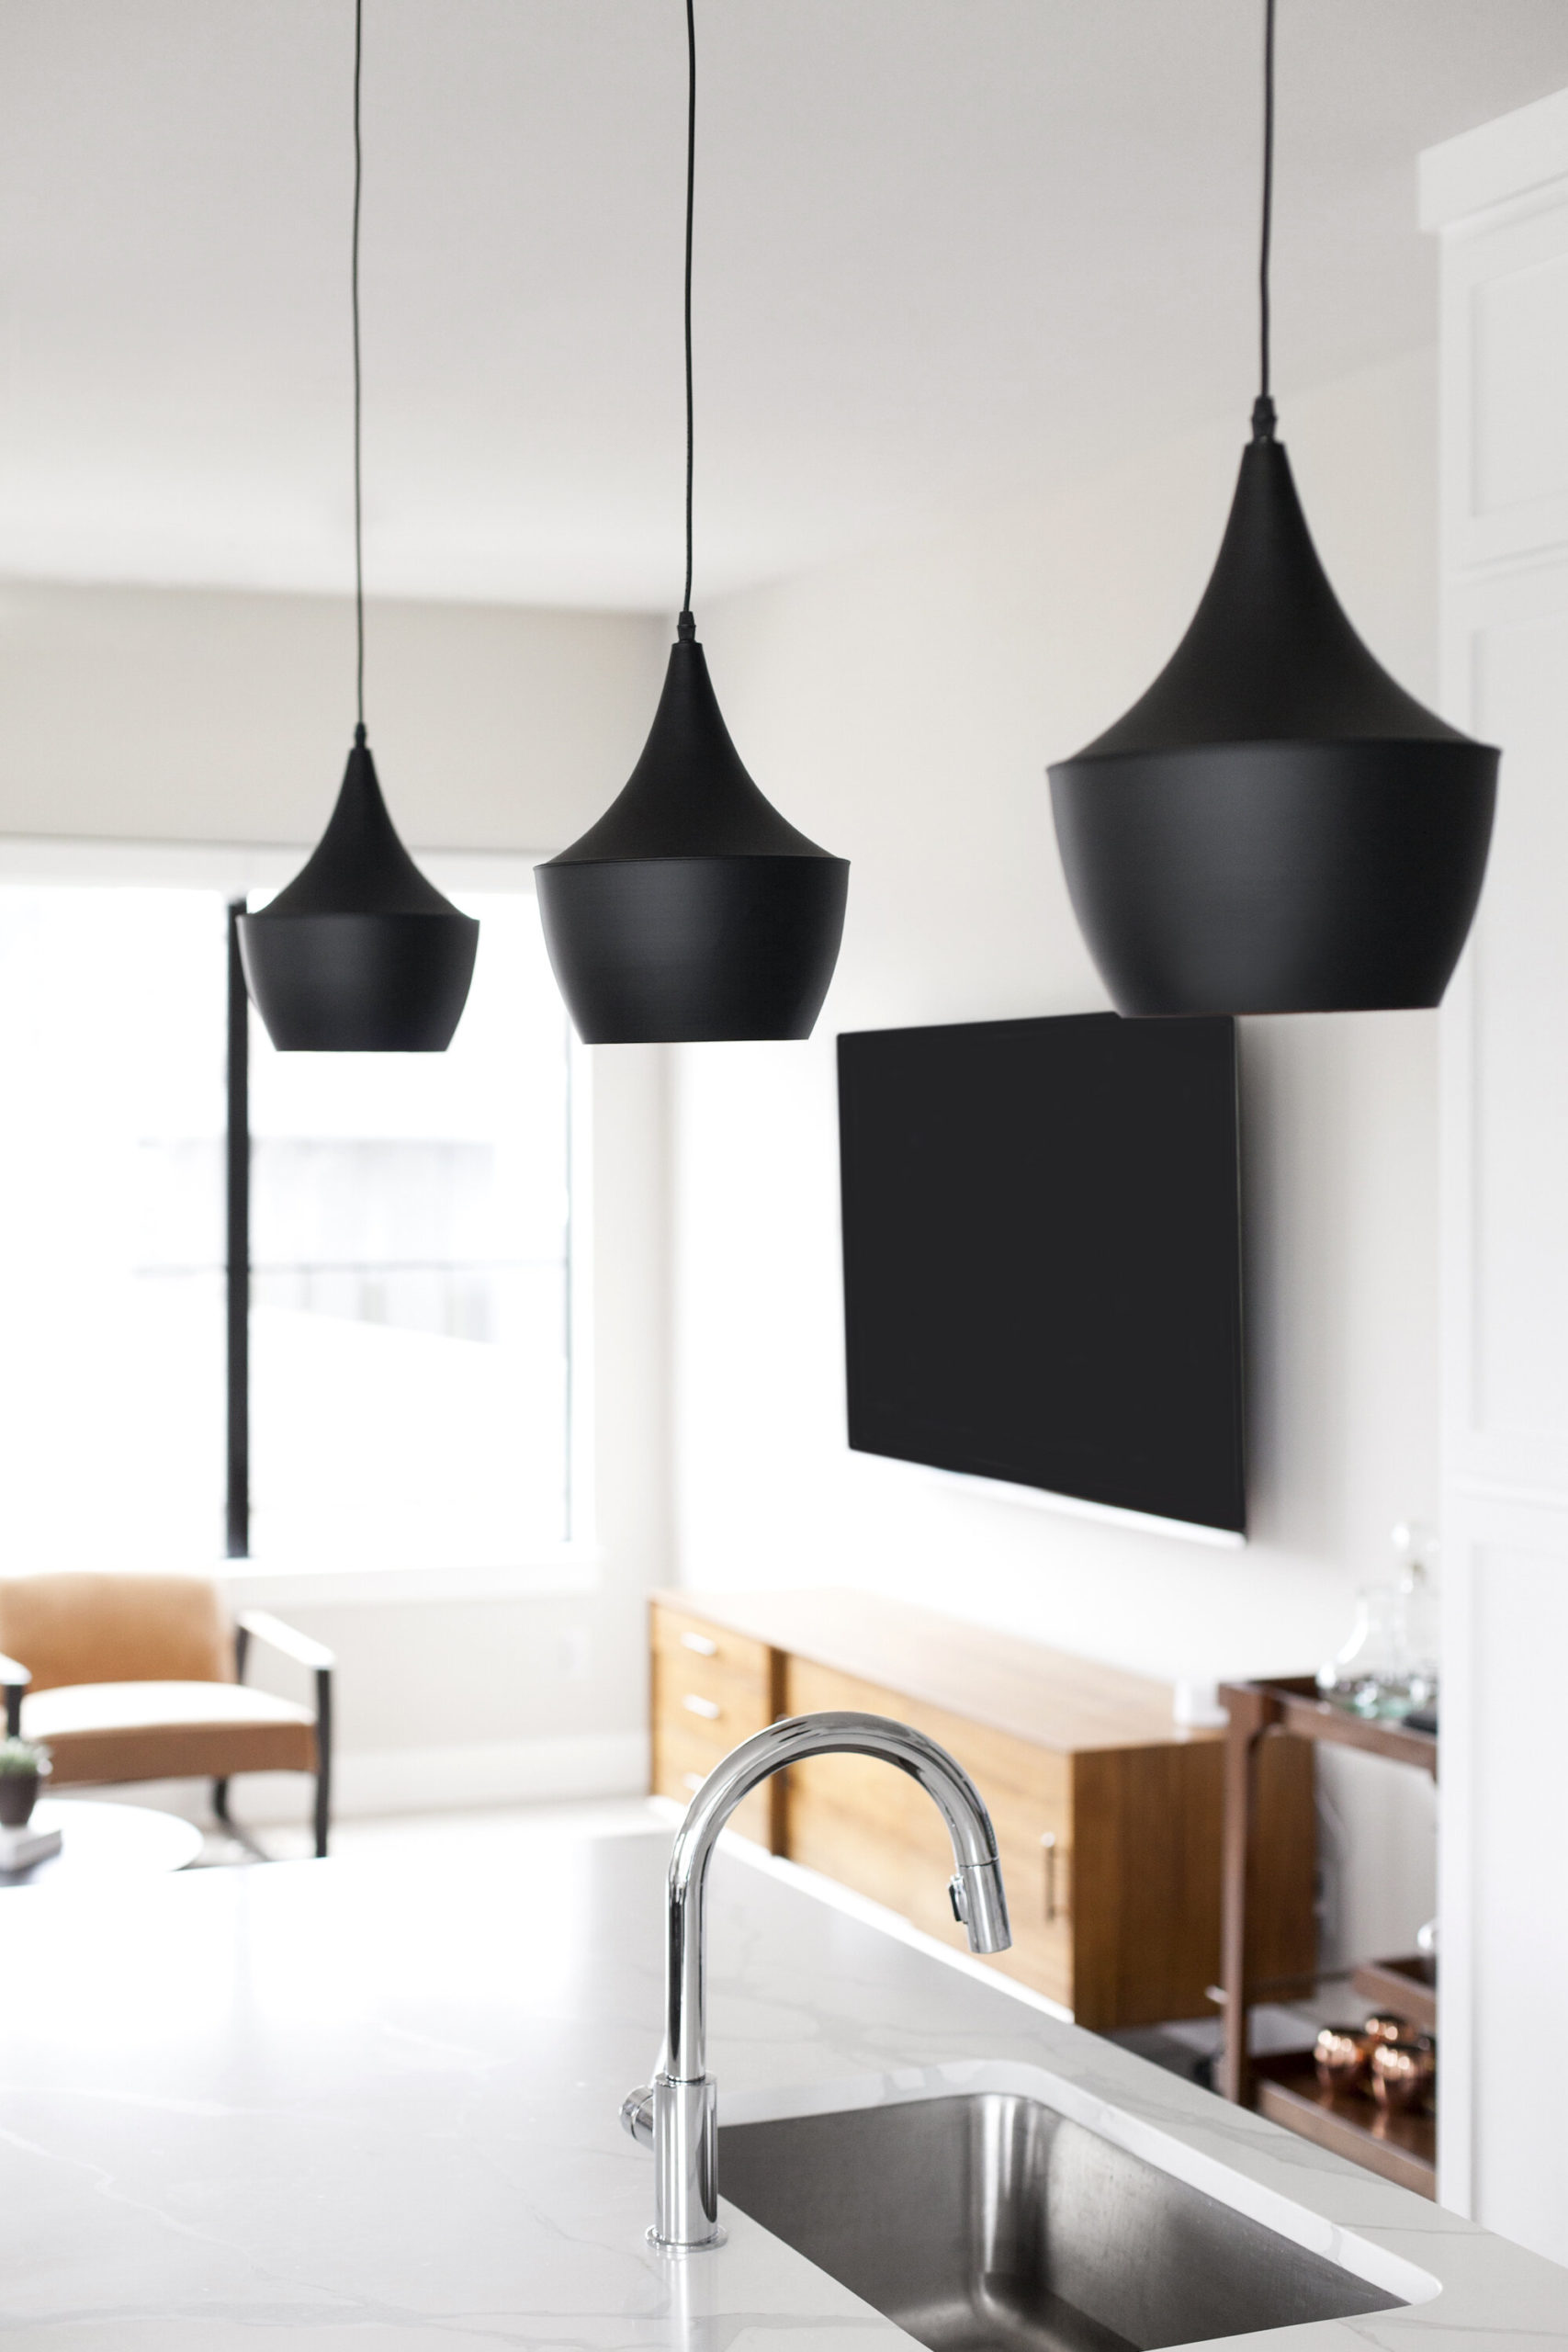 Pendant lights (similar); these would have also been rad